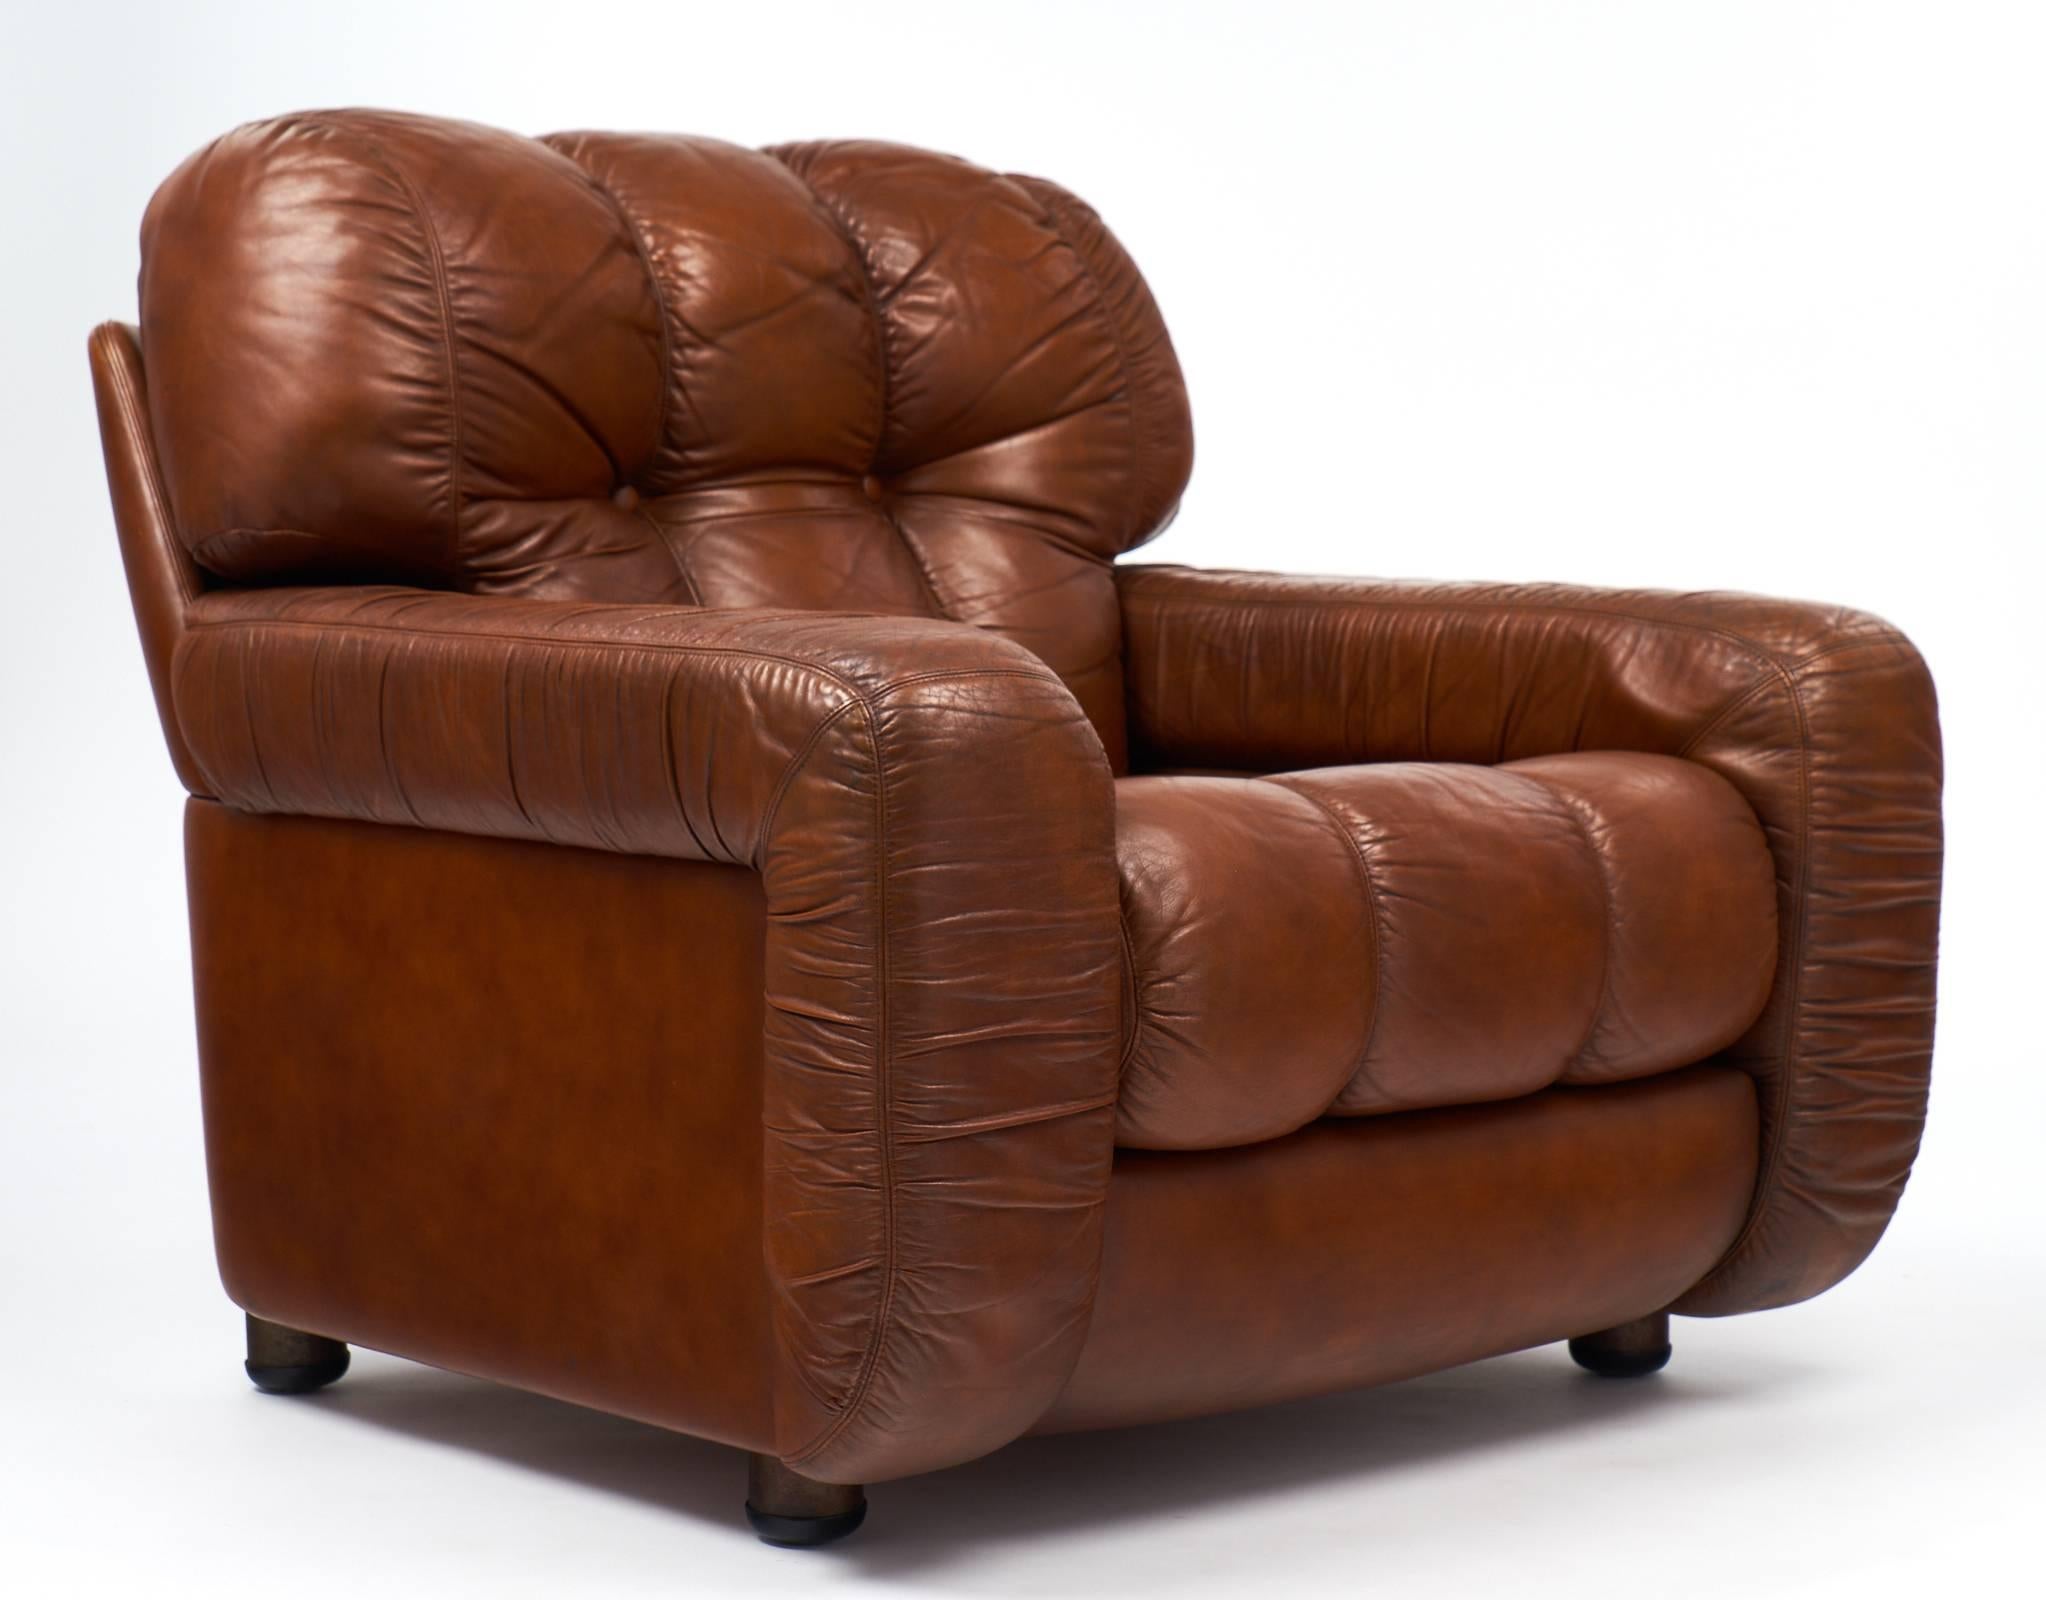 French Vintage Overstuffed Leather Club Chairs At 1stdibs